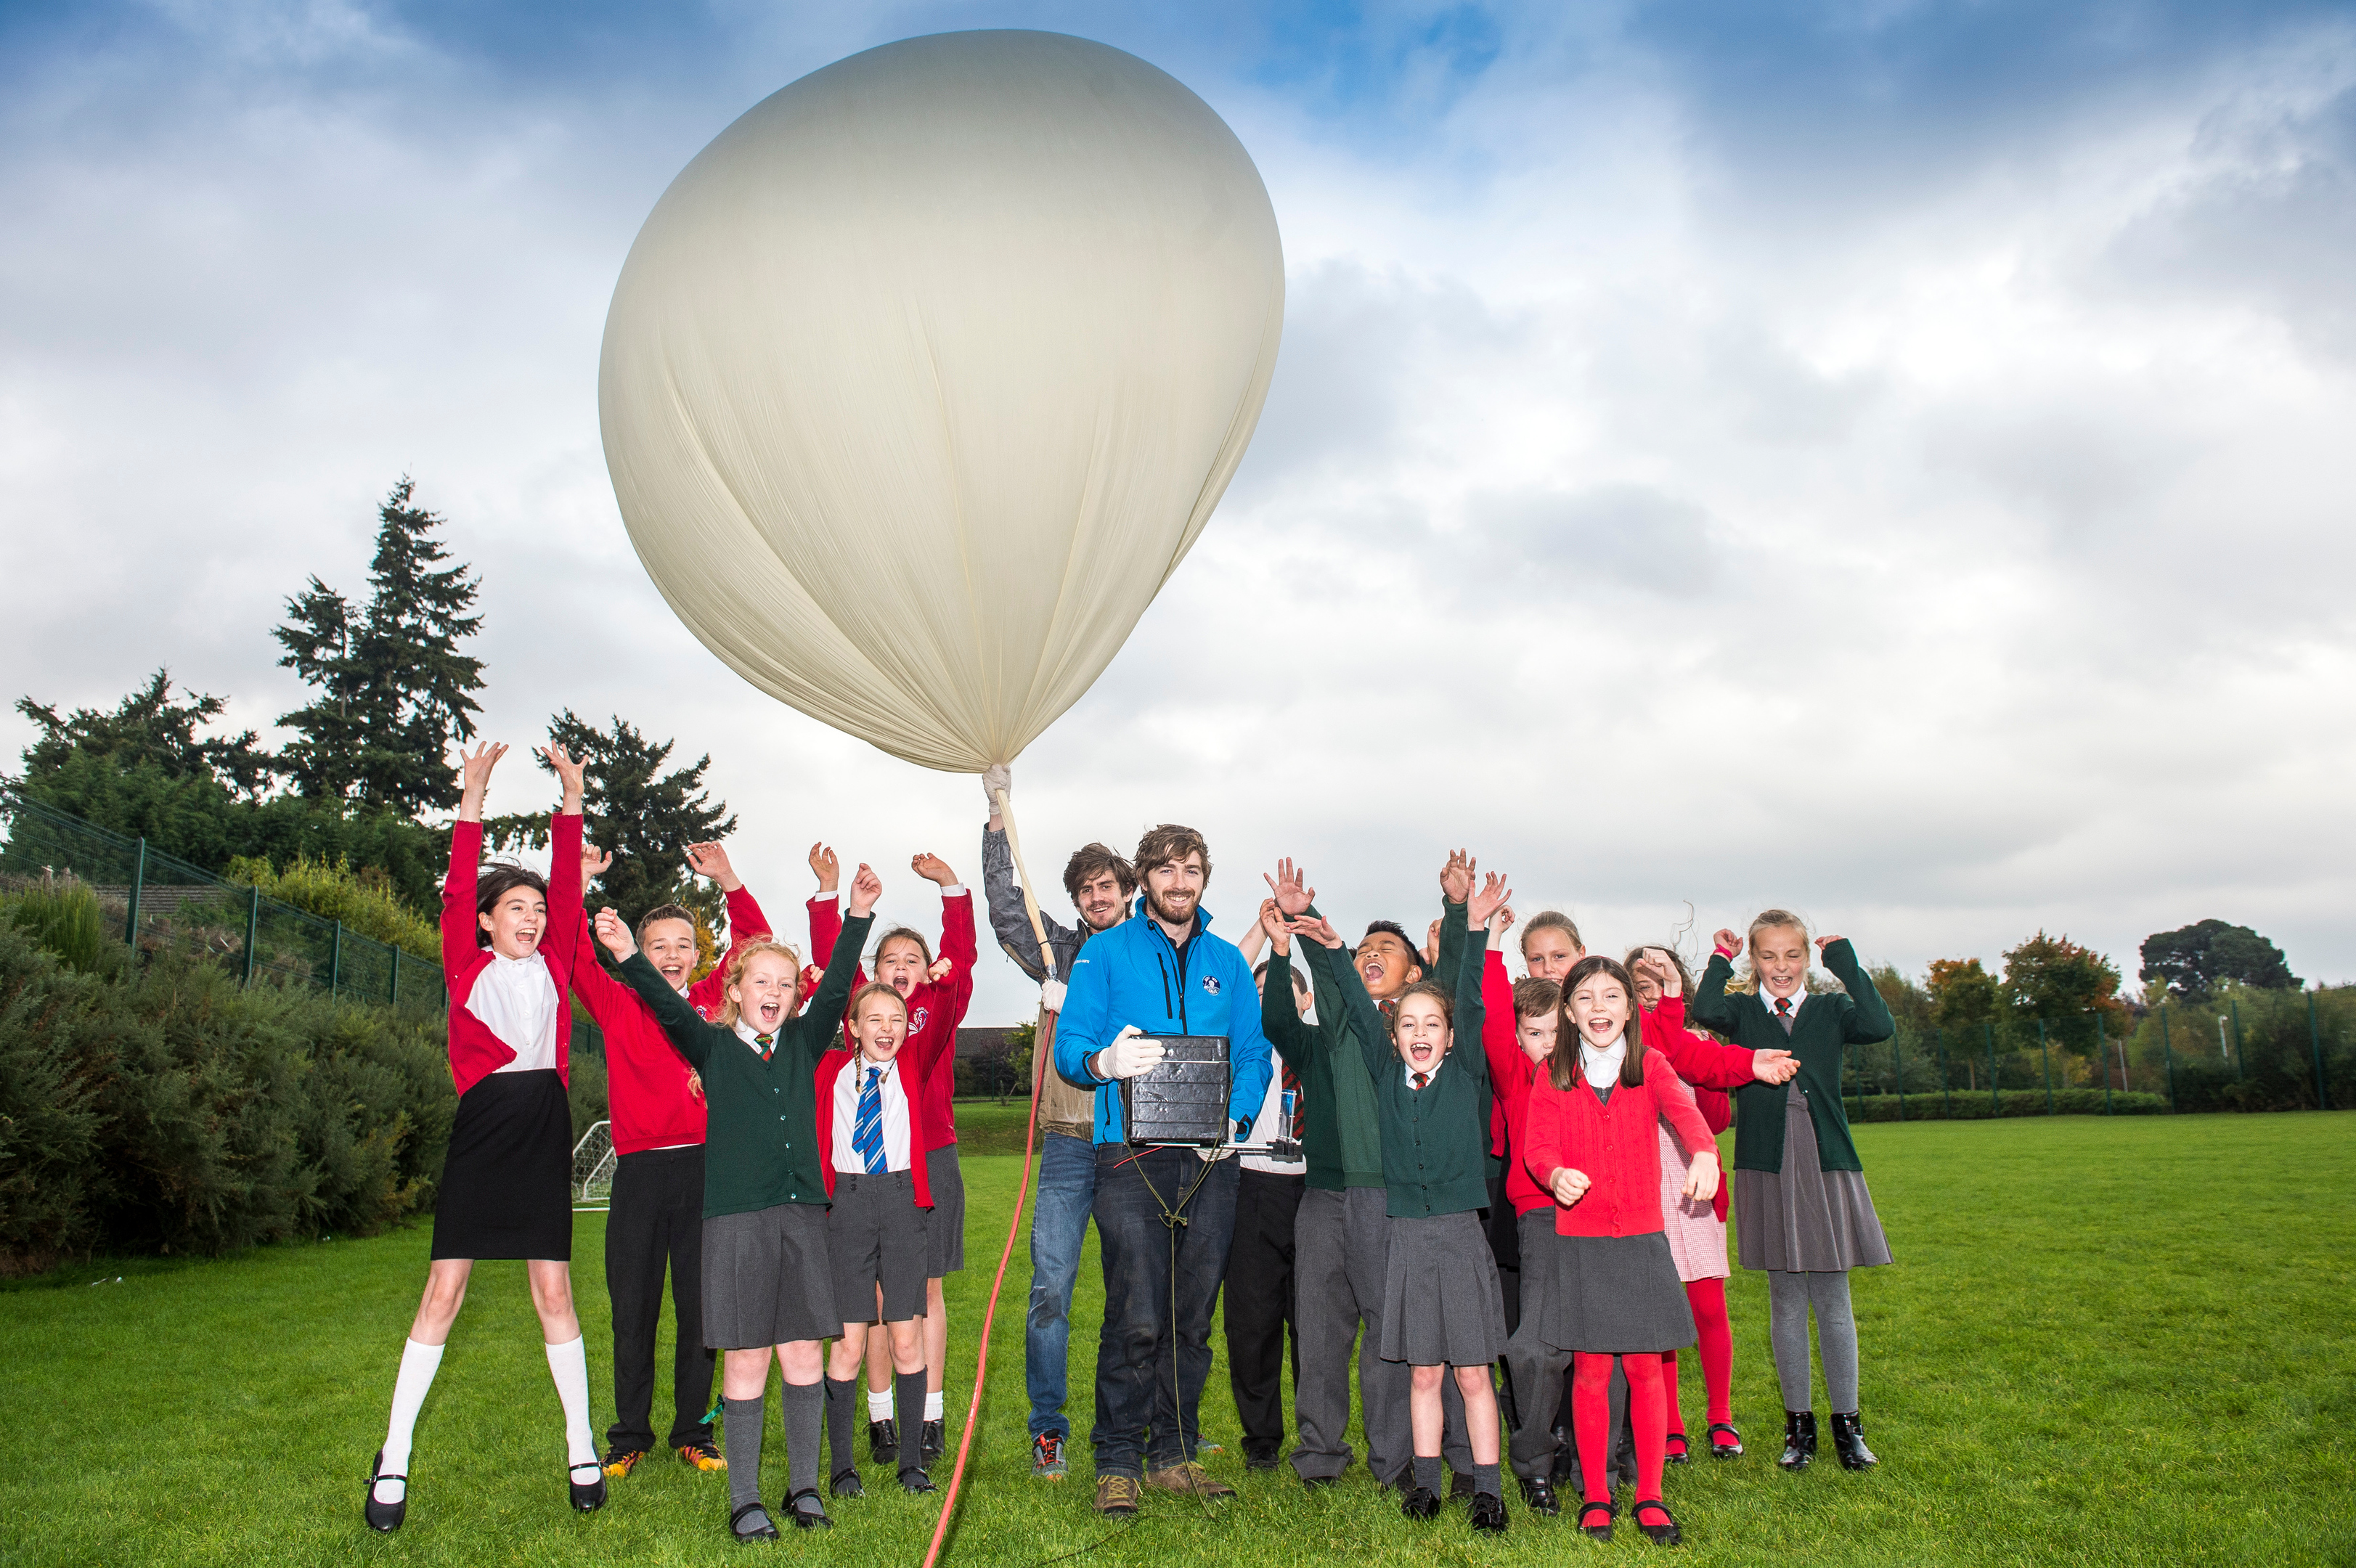 Primary 6/7 pupils at Blairgowrie Community Campus launch the note into space.